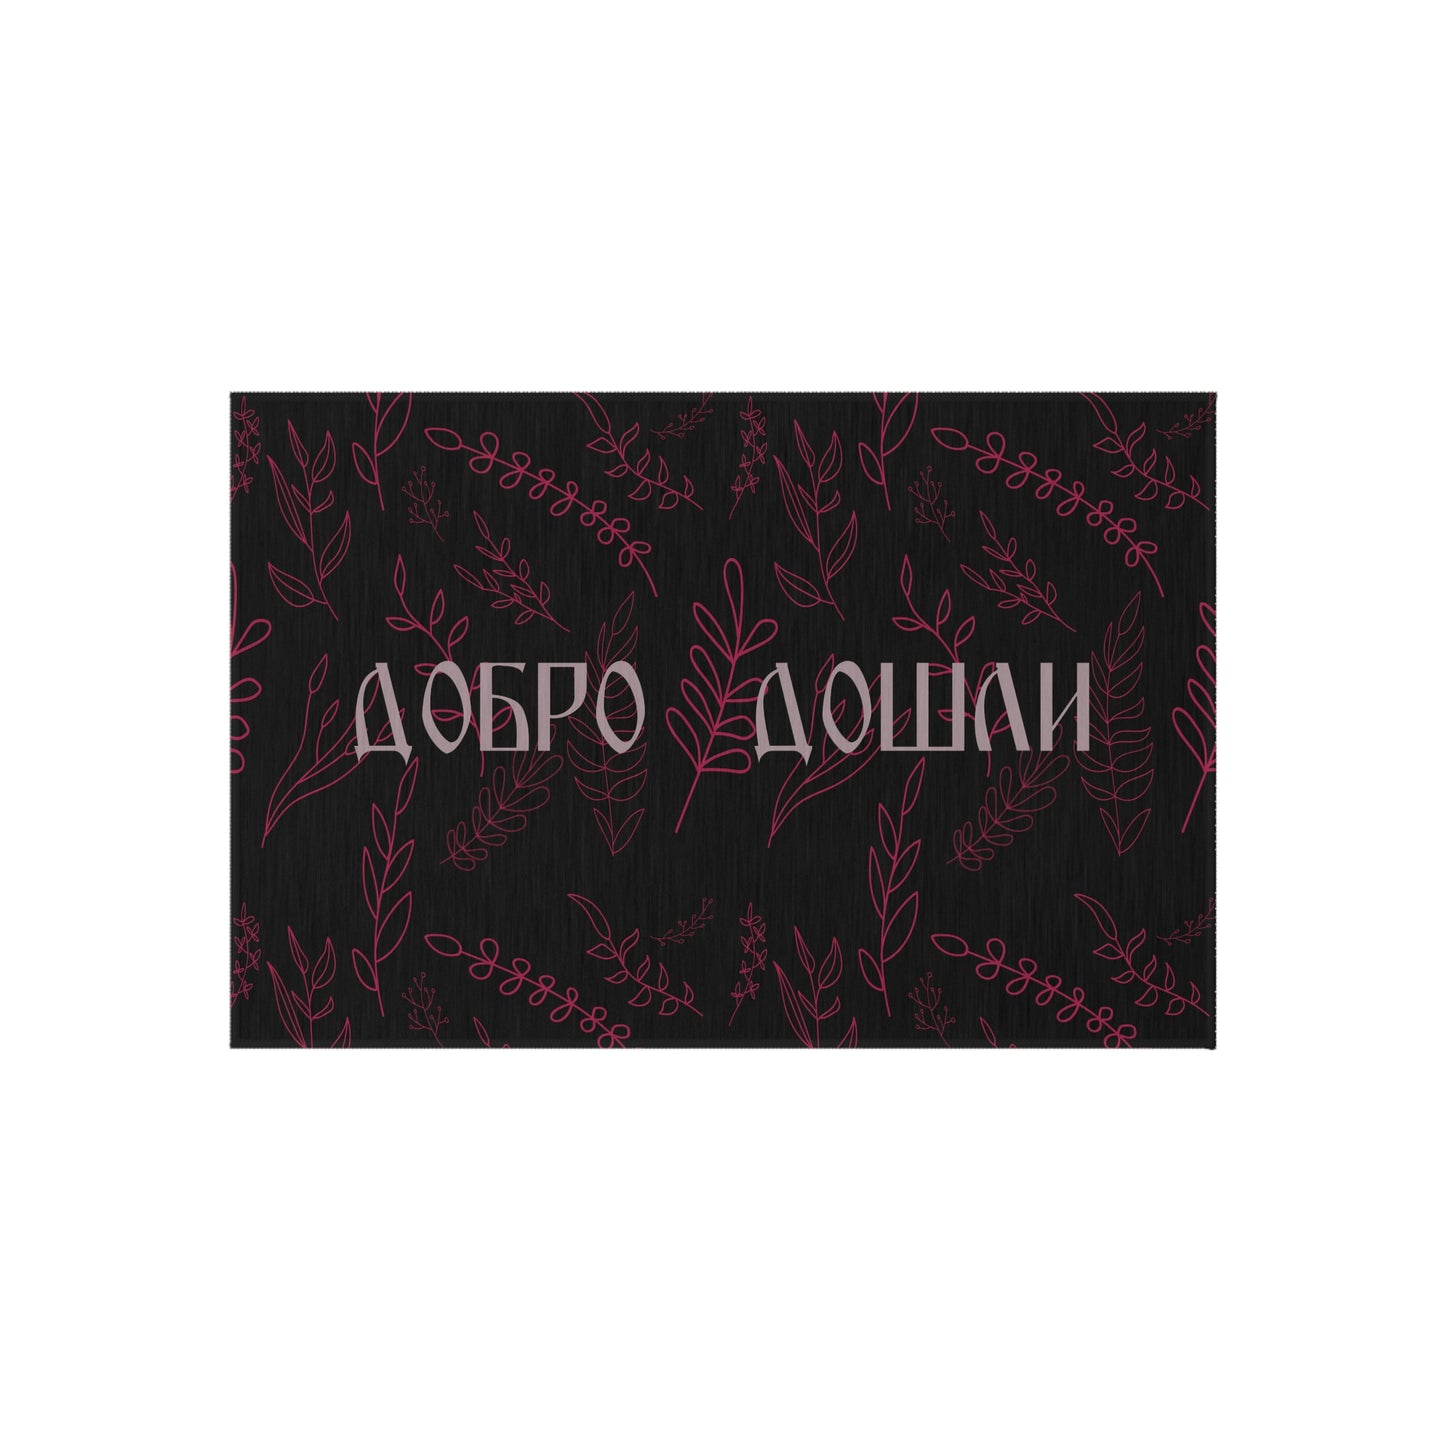 Outdoor/Indoor Rug - Black with Modern Mauve Graphic Leaves - Welcome / Добро Дошли Cyrillic